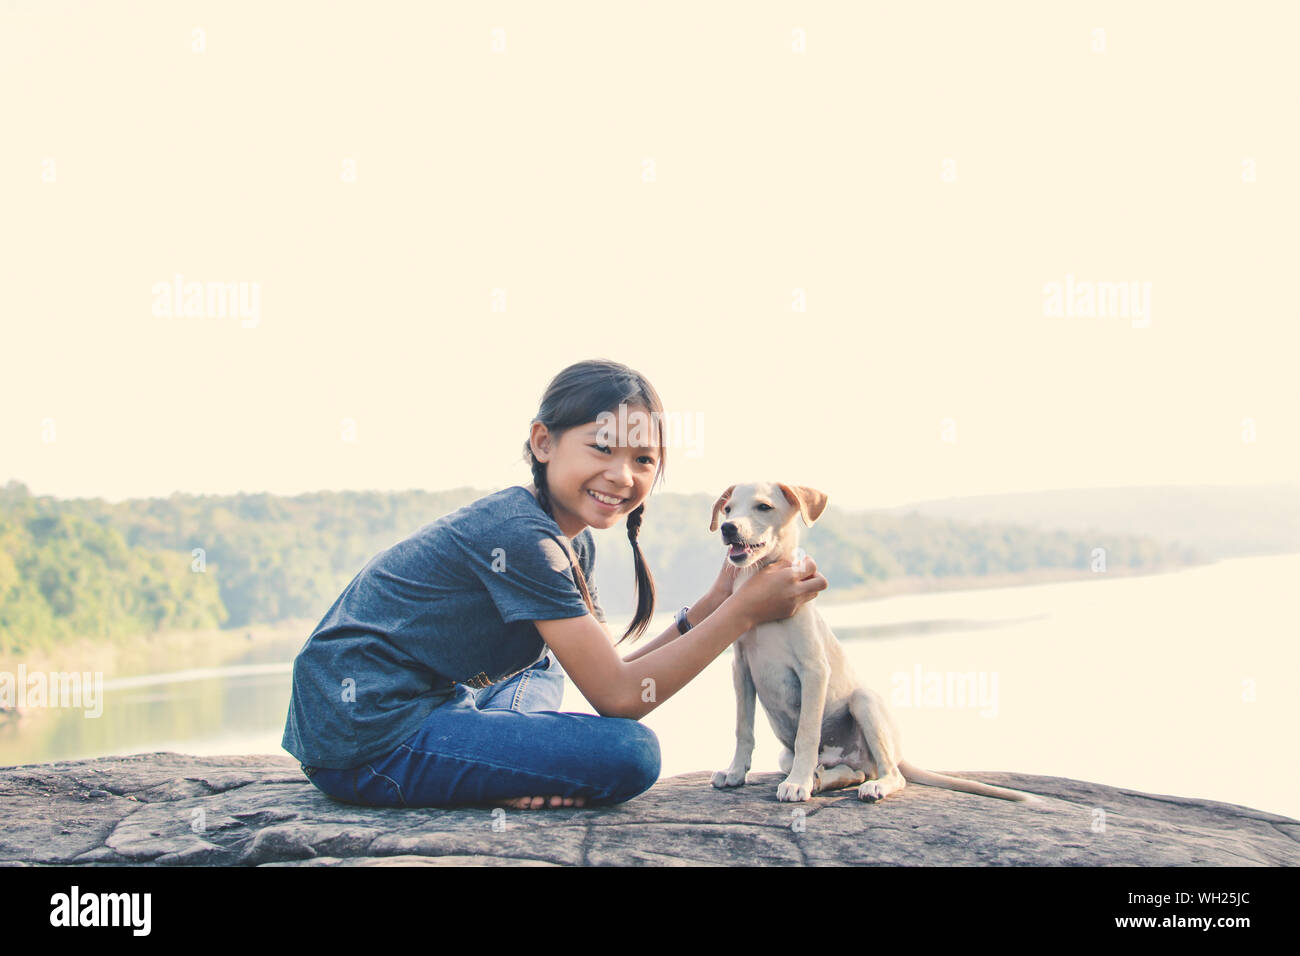 Side View Of Happy Girl Sitting With Puppy On Rock Against Lake Stock Photo